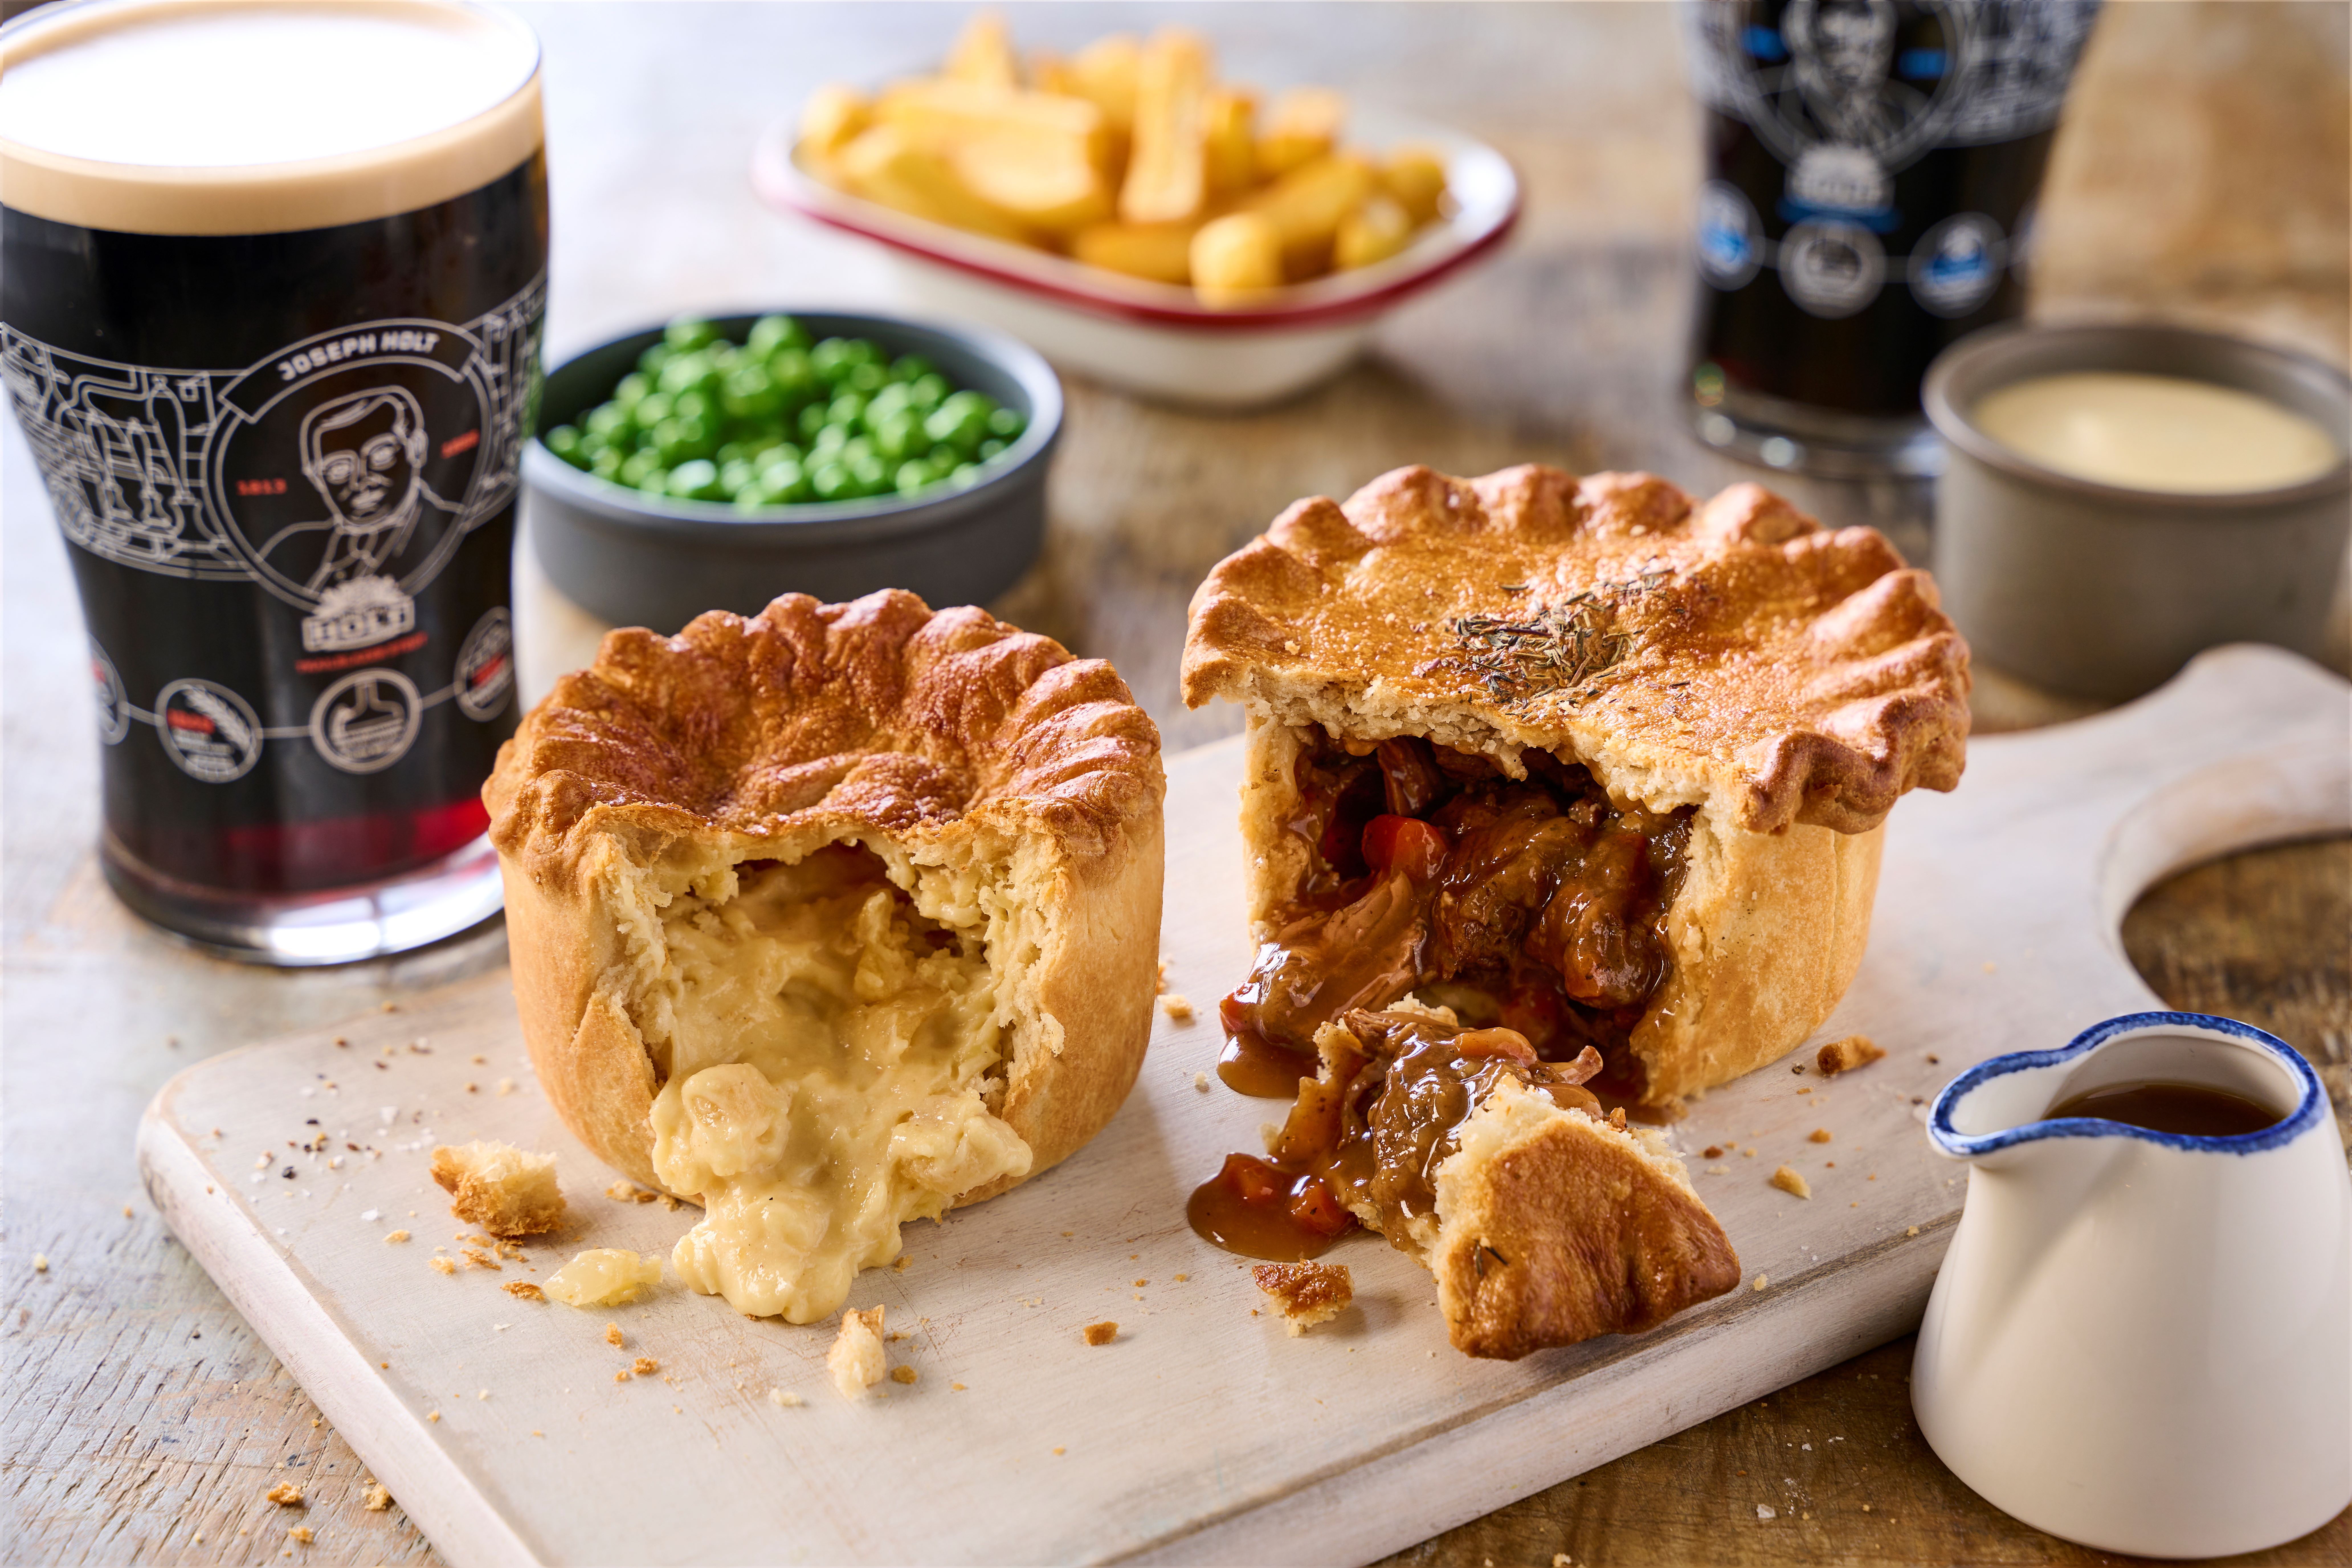 Cheese and onion, steak and ale pies